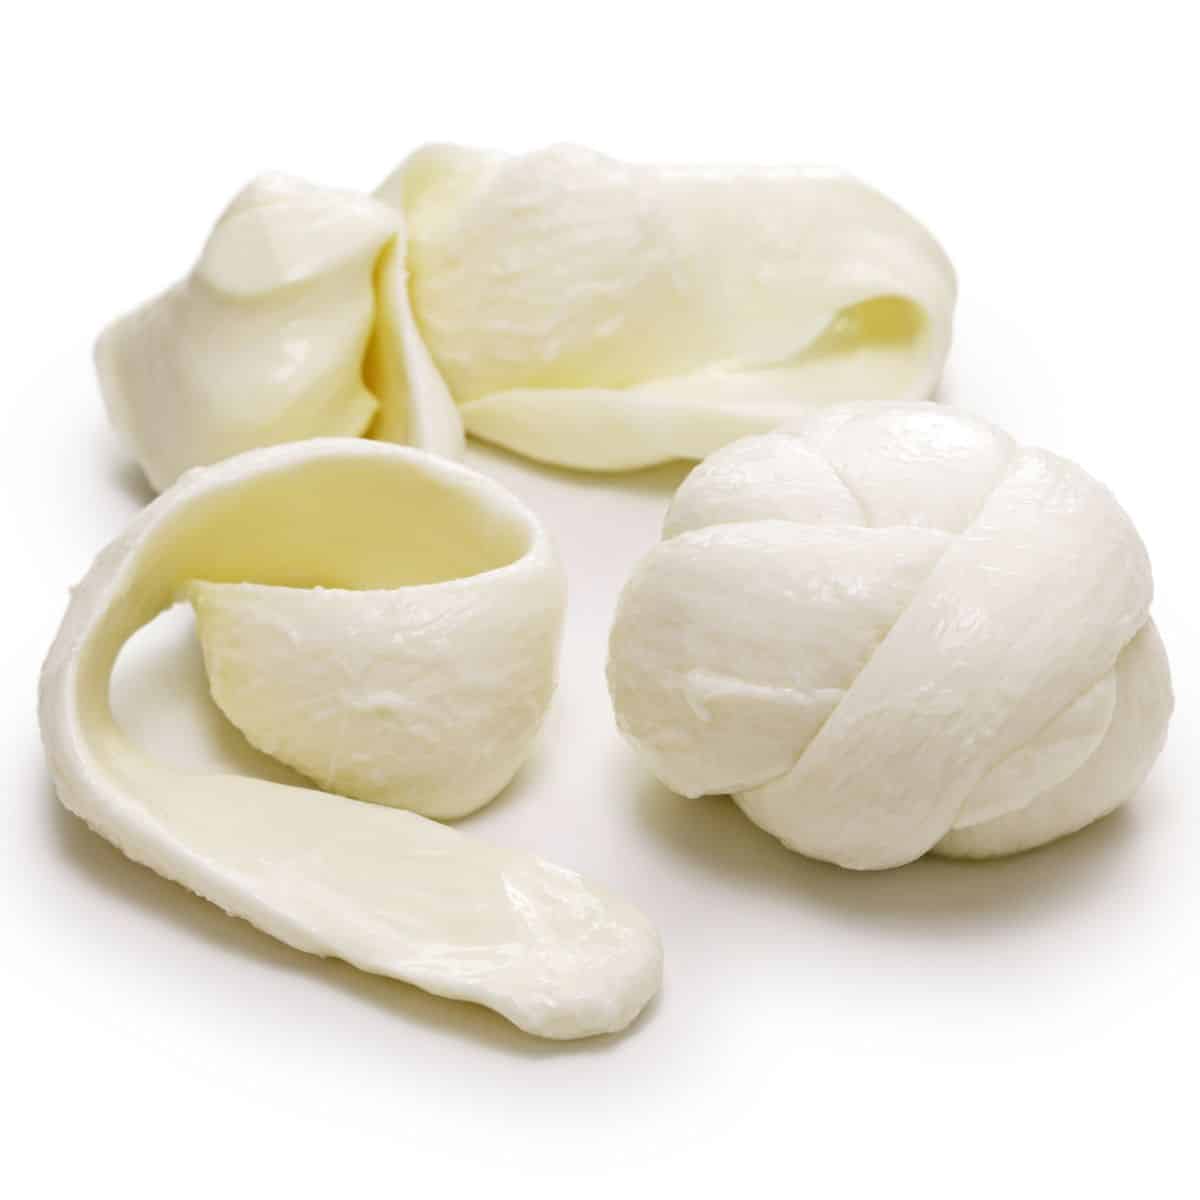 Oaxaca cheese unrolled on a white background.